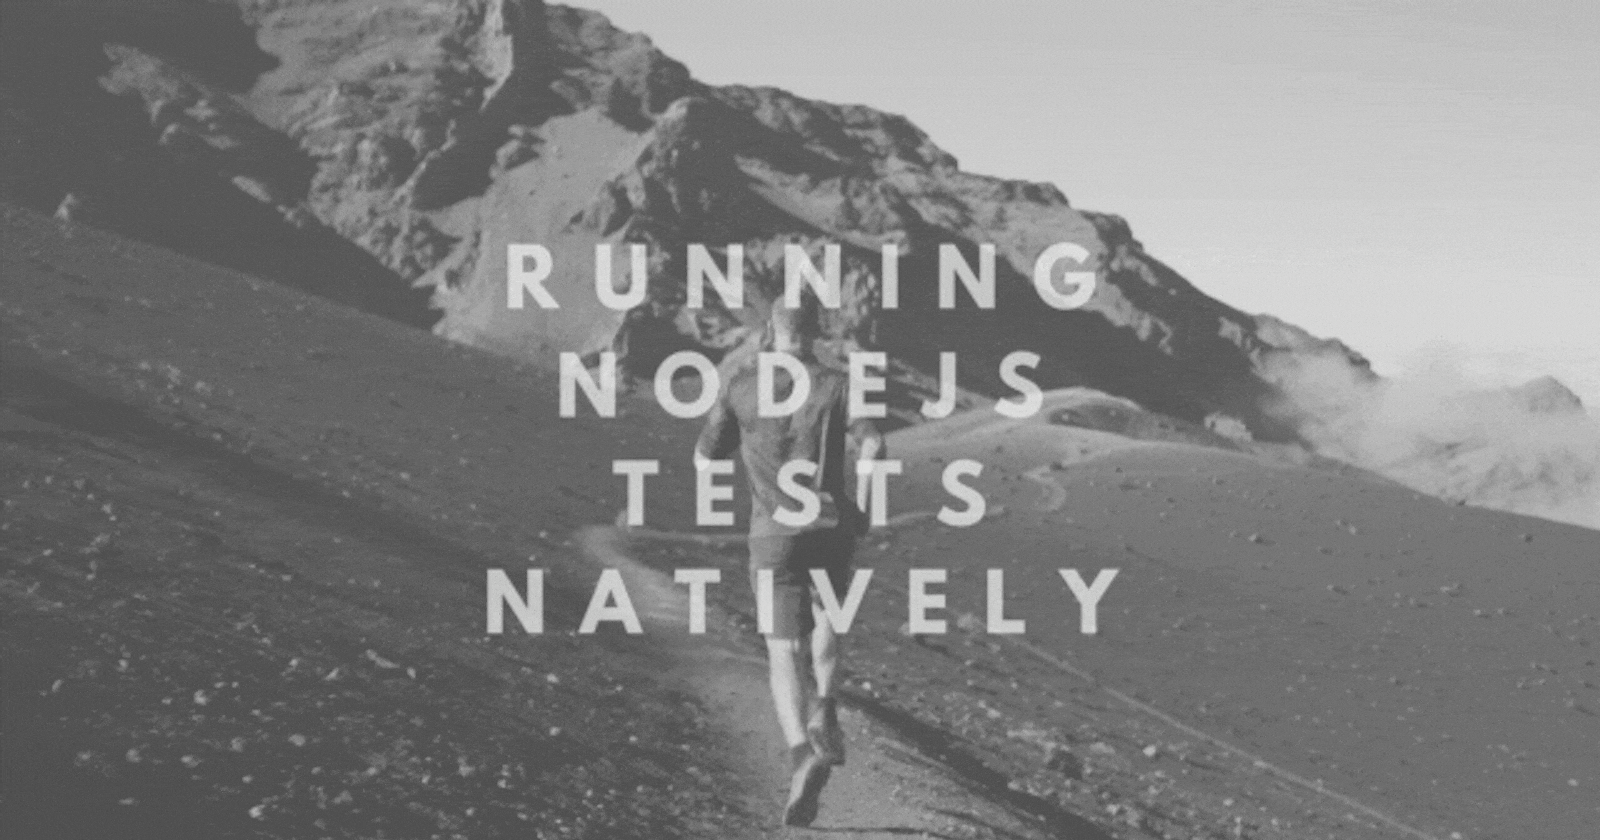 NodeJS: We can run tests natively!